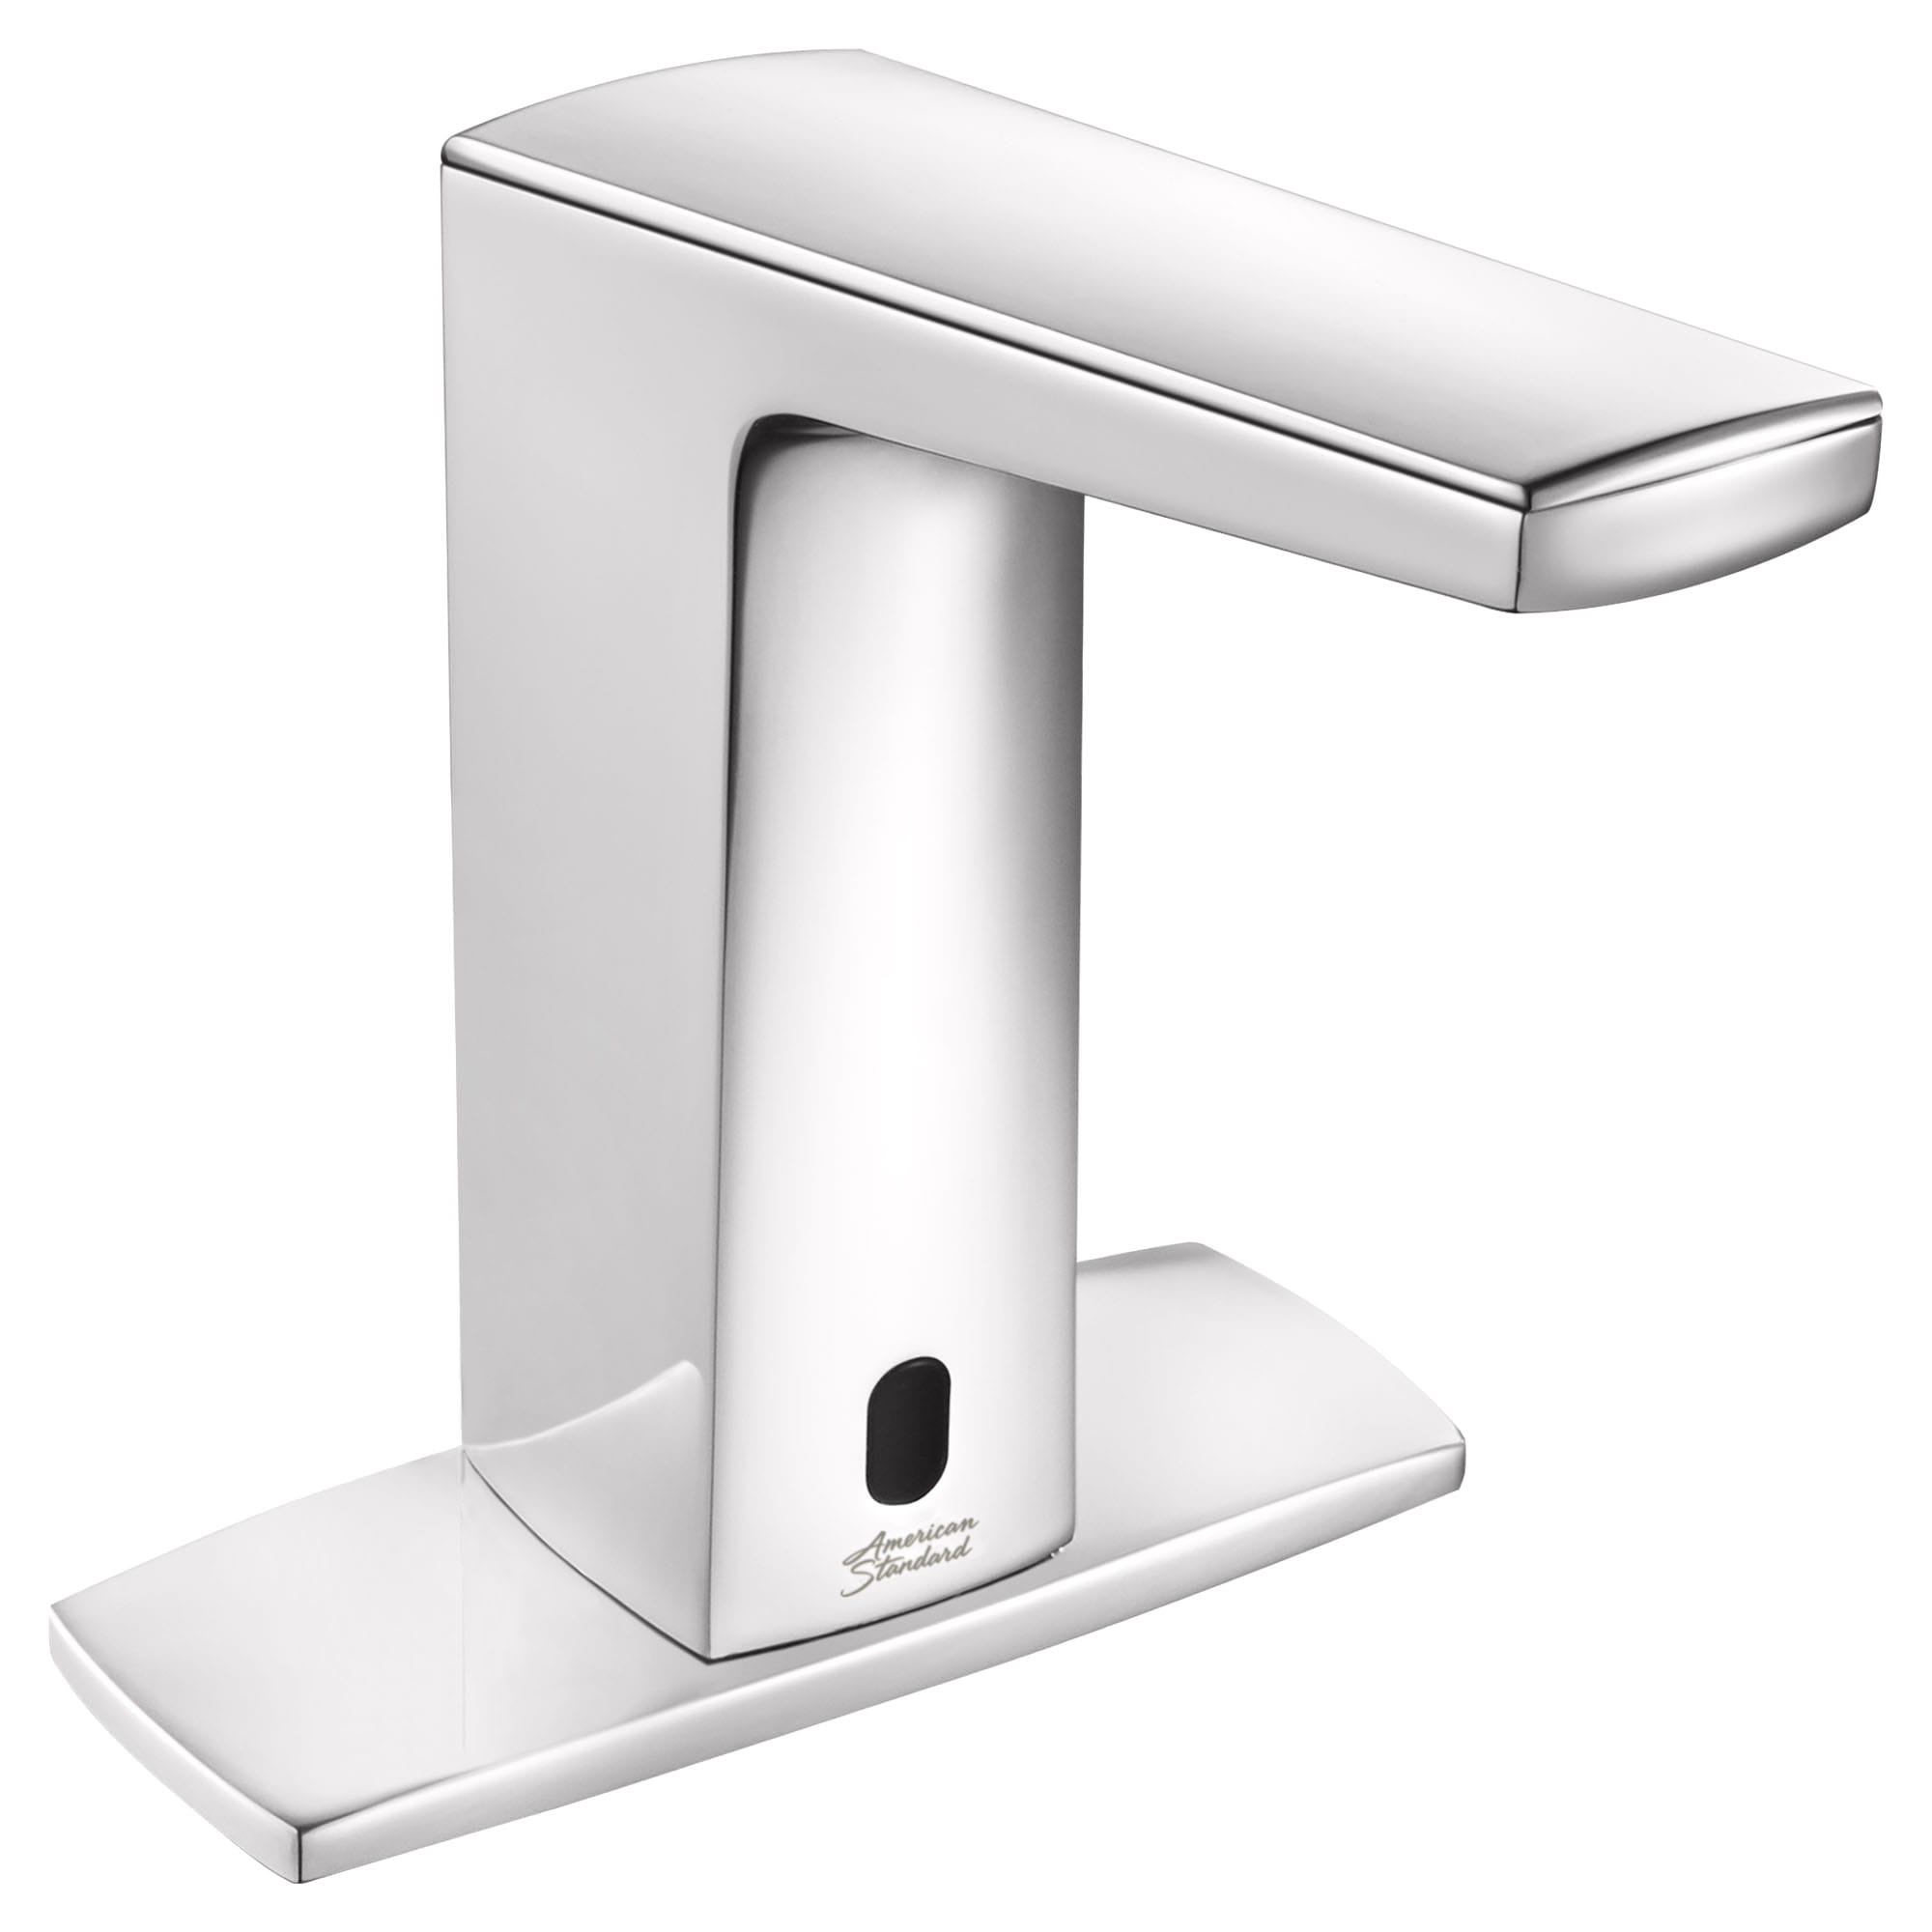 Paradigm® Selectronic® Touchless Faucet, Base Model With Above-Deck Mixing, 1.5 gpm/5.7 Lpm